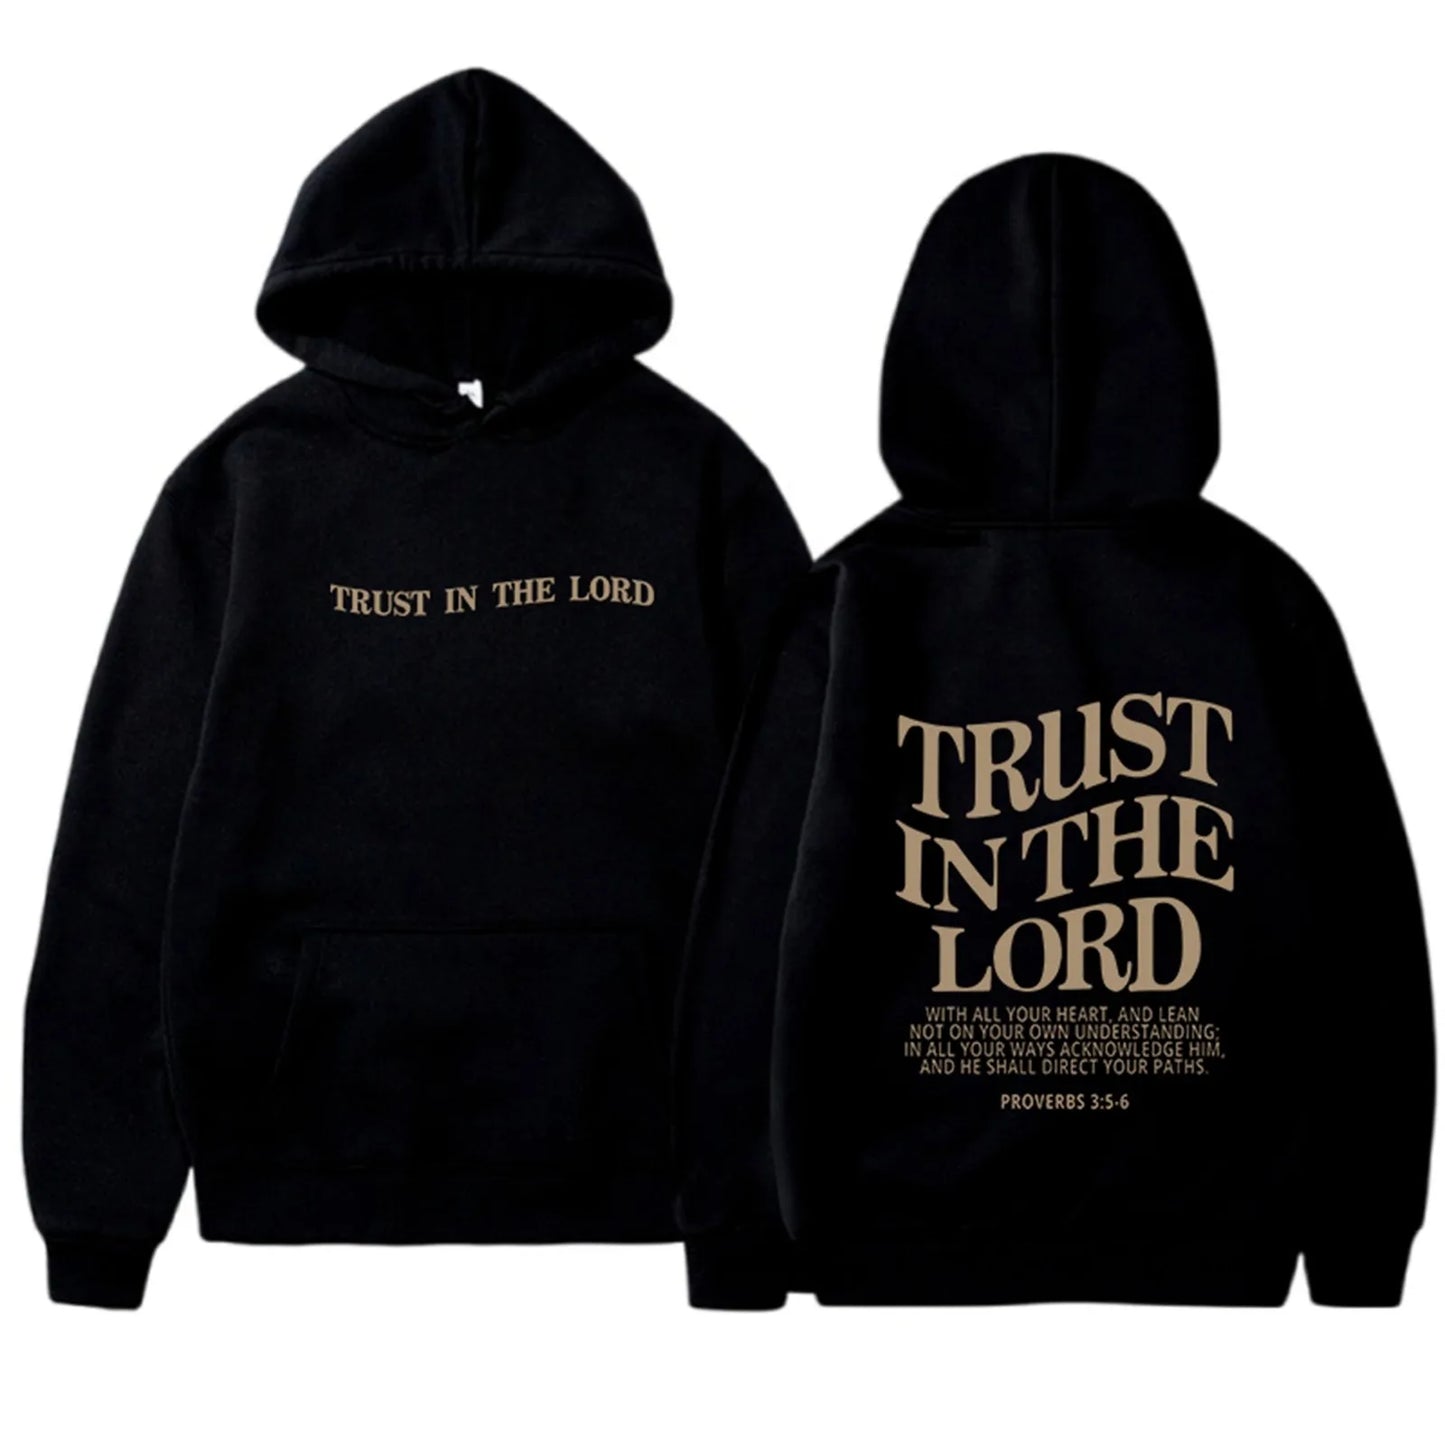 'Trust in the Lord" Oversized Hoodie